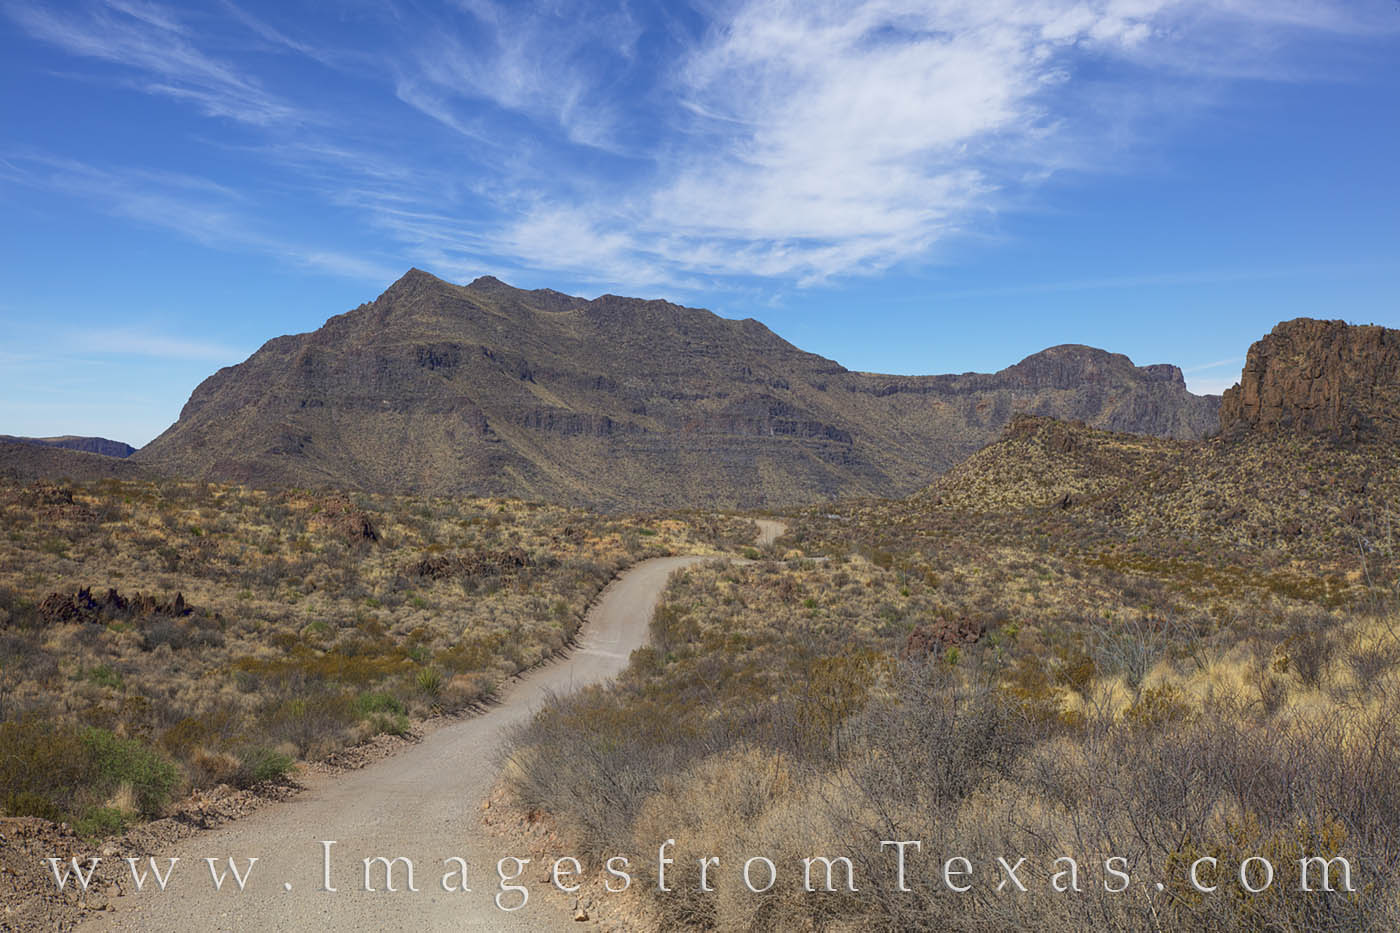 The dirt road that leads to the Sauceda Ranch House rattles on for 27 miles, and further after that. Heading east, after the...